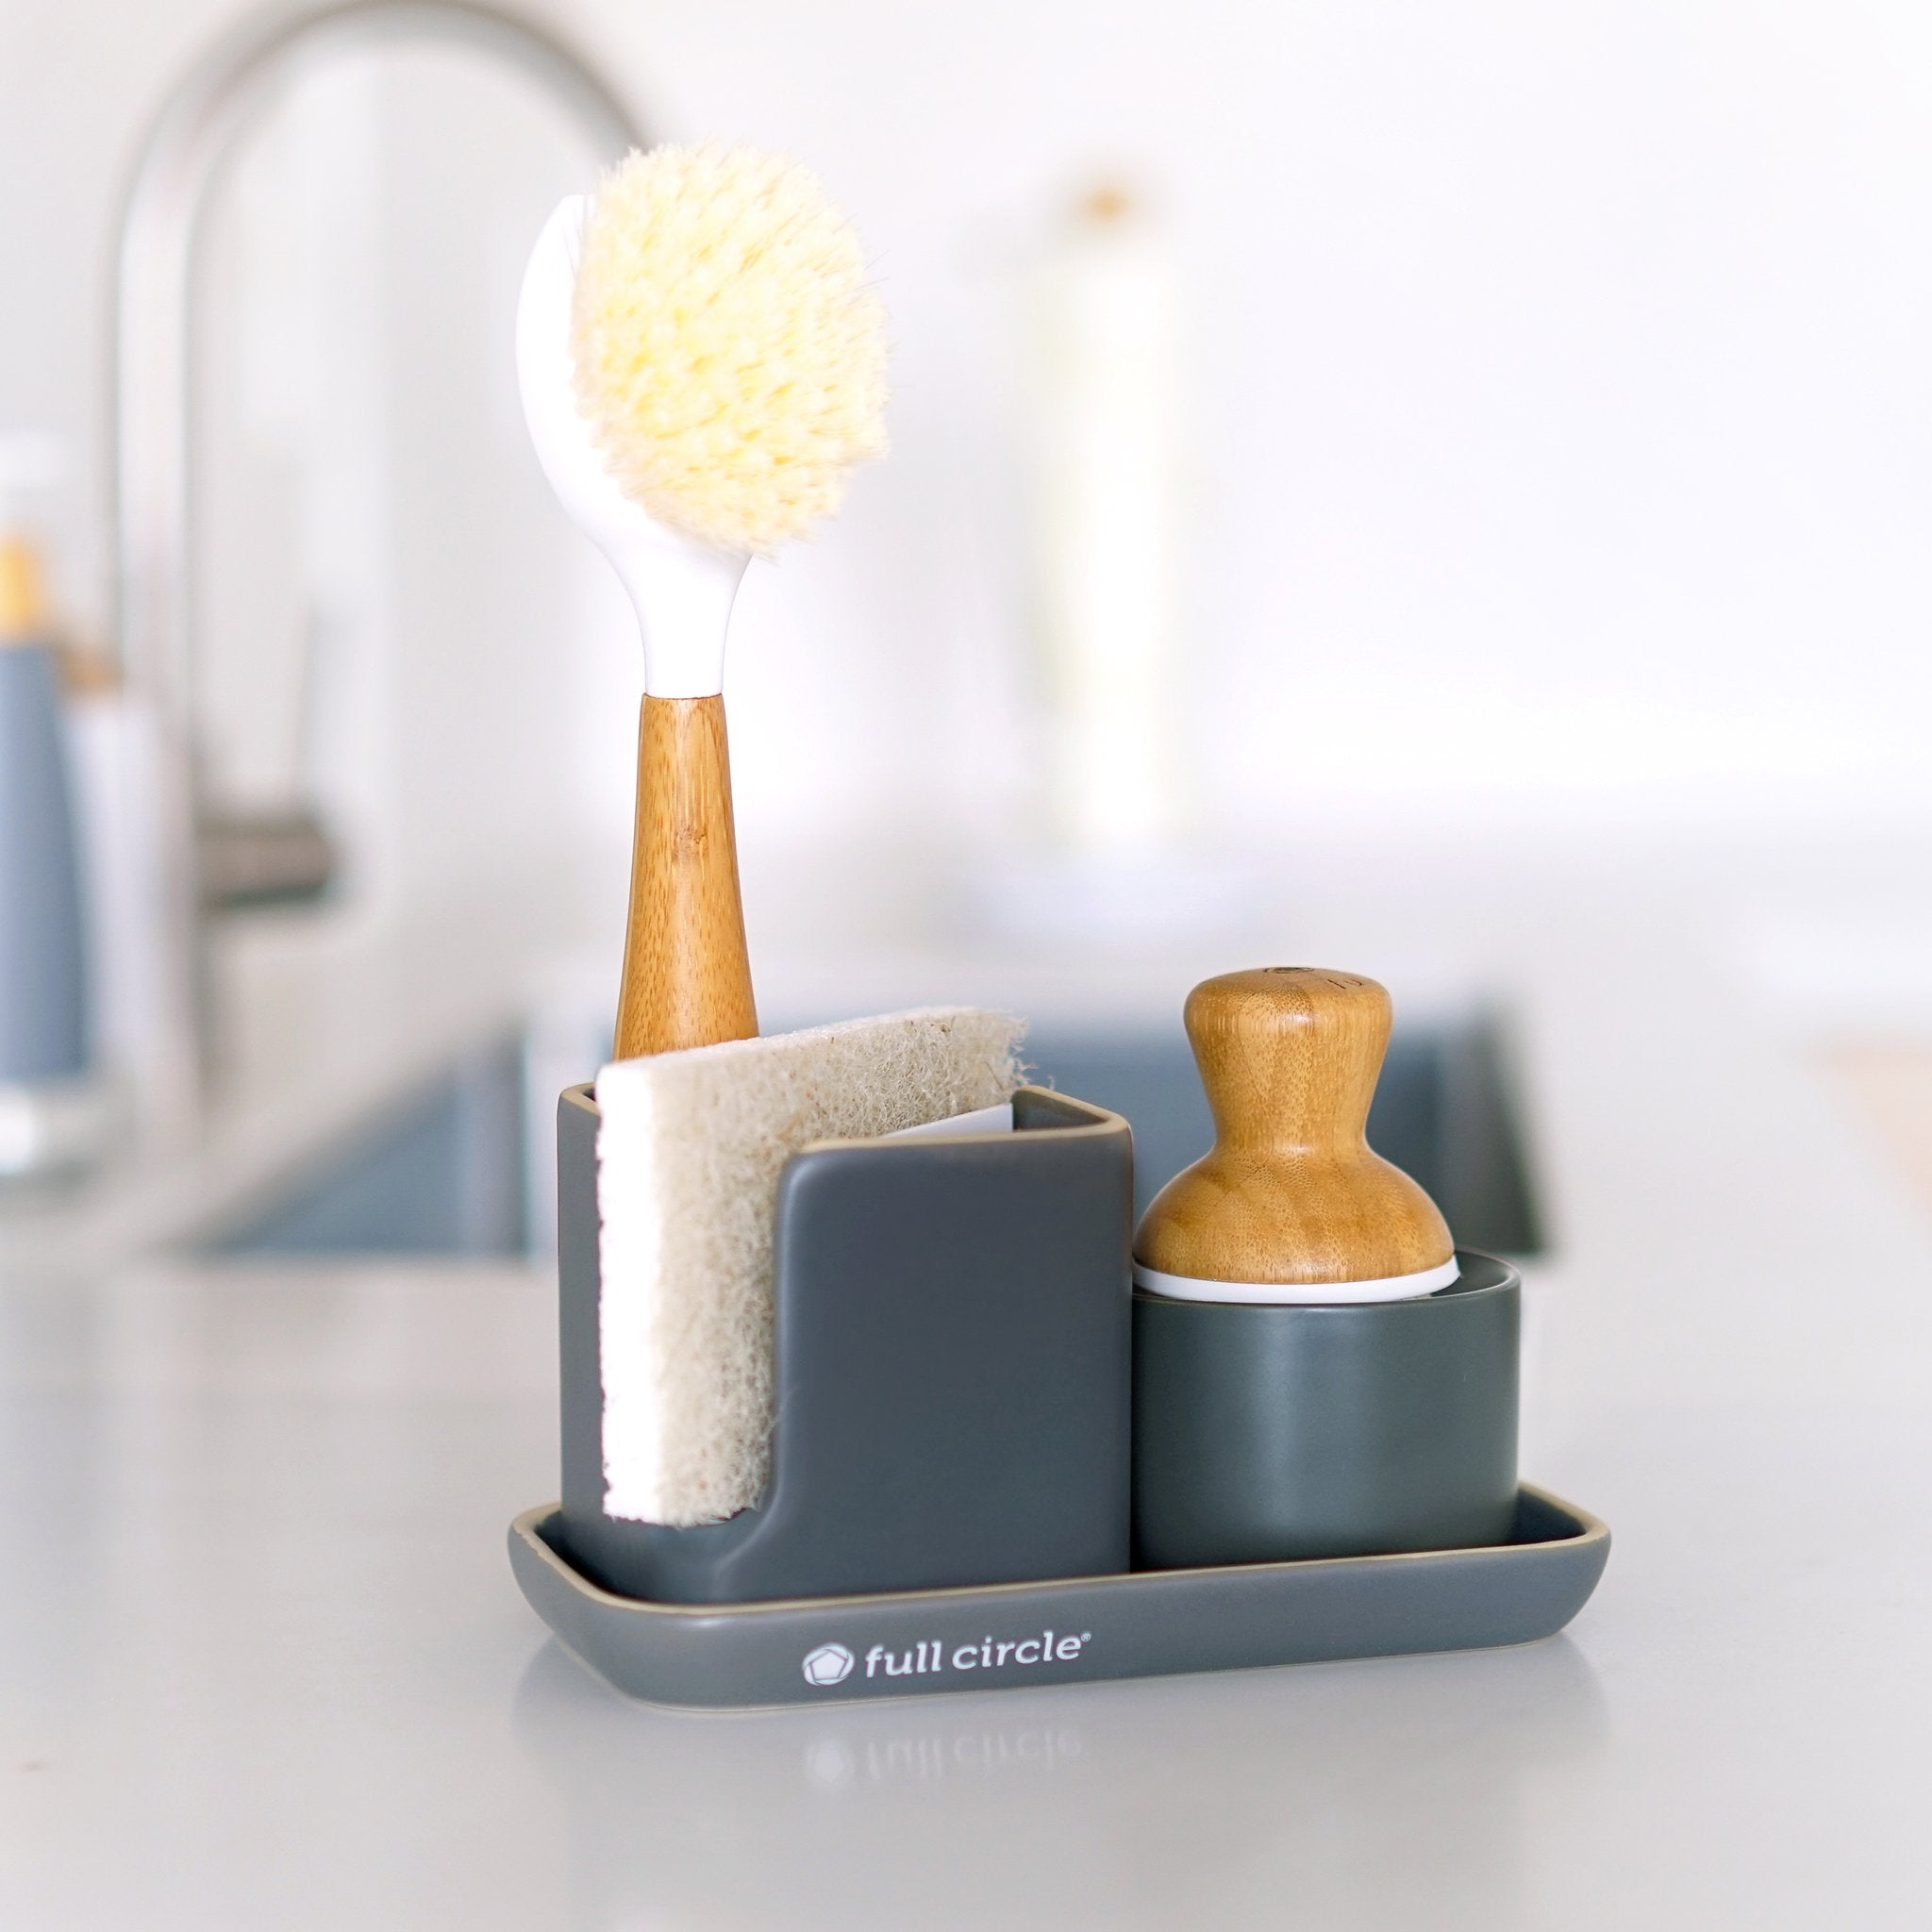 How to Use the Bubble Up, Say goodbye to messy sponges and say hello to  one of our bestselling, fan-favorite products: The Bubble Up. Made with  renewable bamboo and recycled